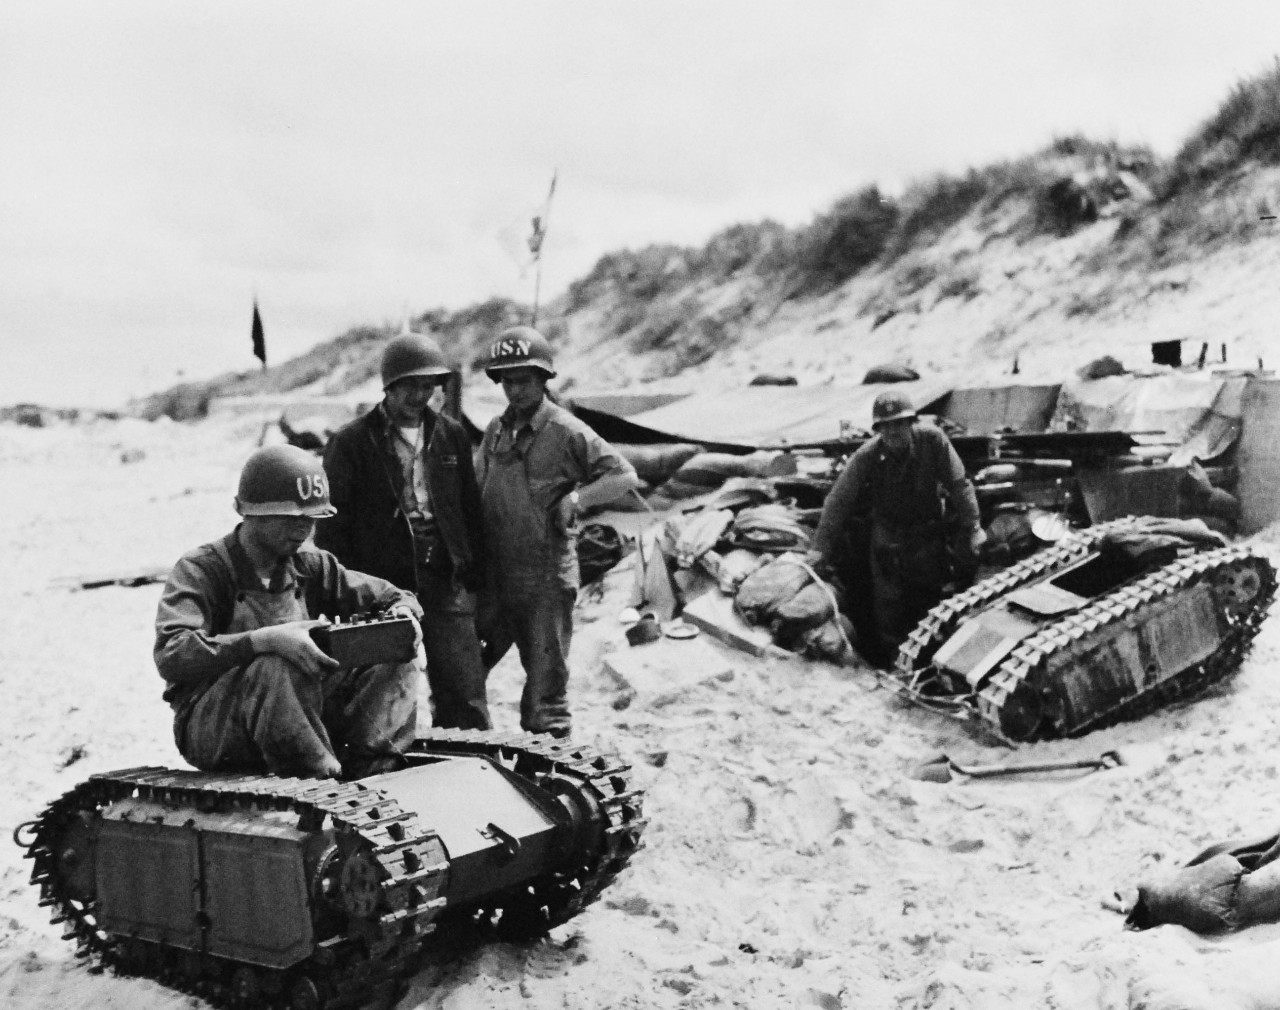 80-G-252746: Normandy Invasion,  Utah Beach, June 1944.  U.S. Navy 2nd Beach Battalion on “Utah” Beach, Bay of Seine, taking captured radio-controlled German “Beetle” tanks to see what makes them tick.   Photograph released, 11 June 1944.  Official U.S. Navy Photograph, now in the collections of the National Archives.   (2014/10/28). 